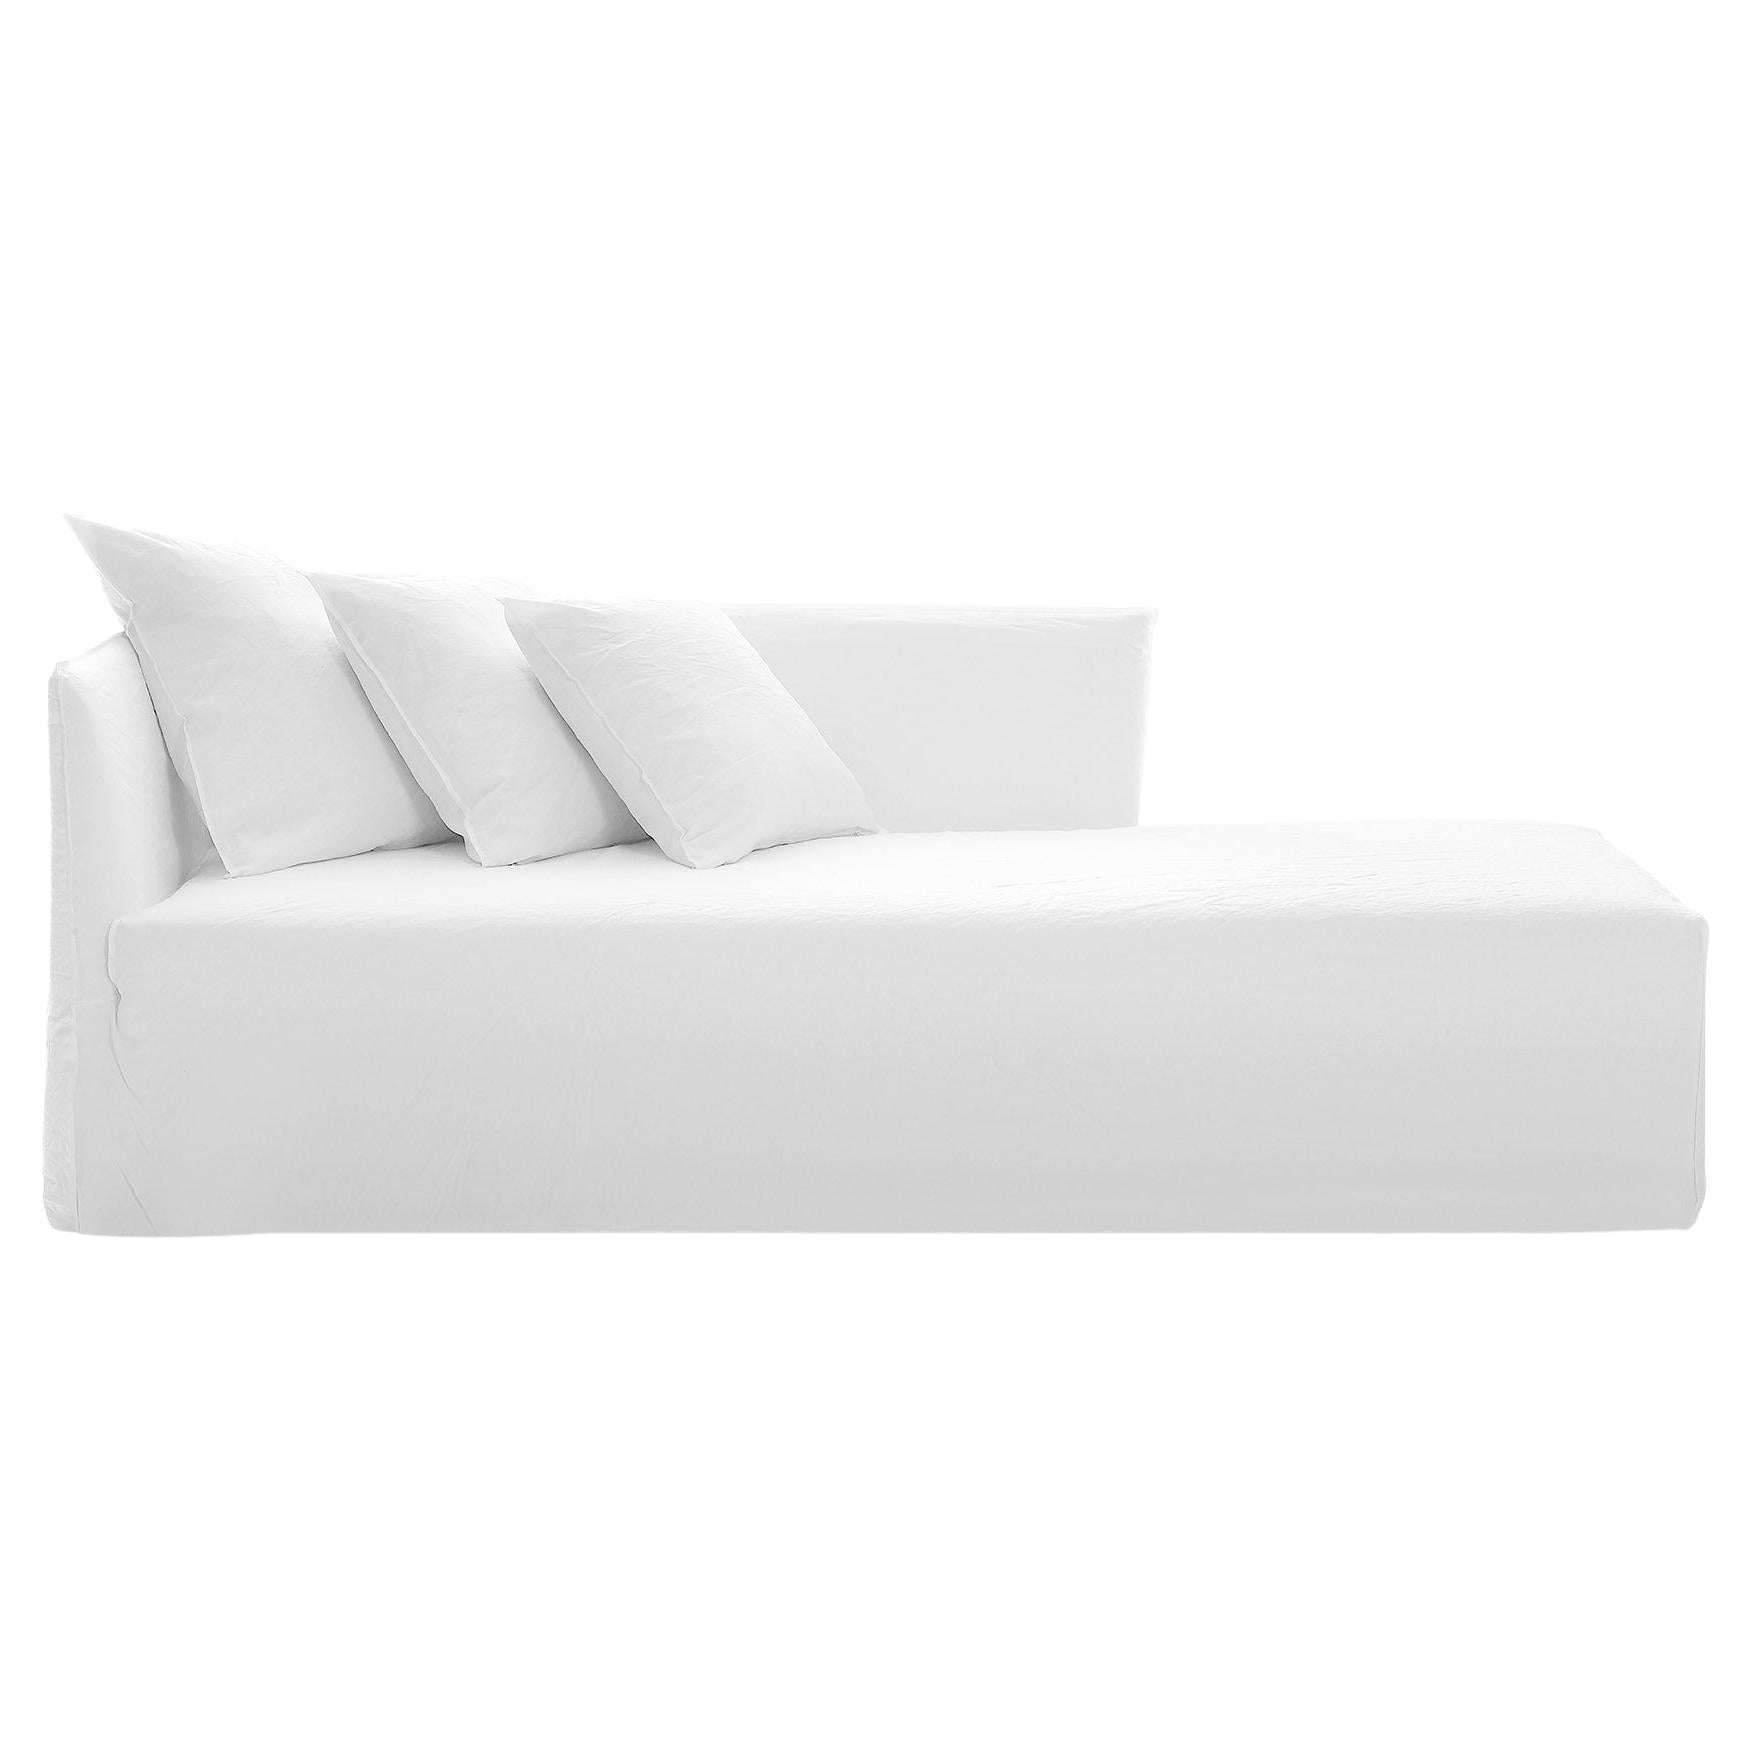 Gervasoni Ghost 20 L Modular Dormeuse in White Linen Upholstery by Paola Navone For Sale